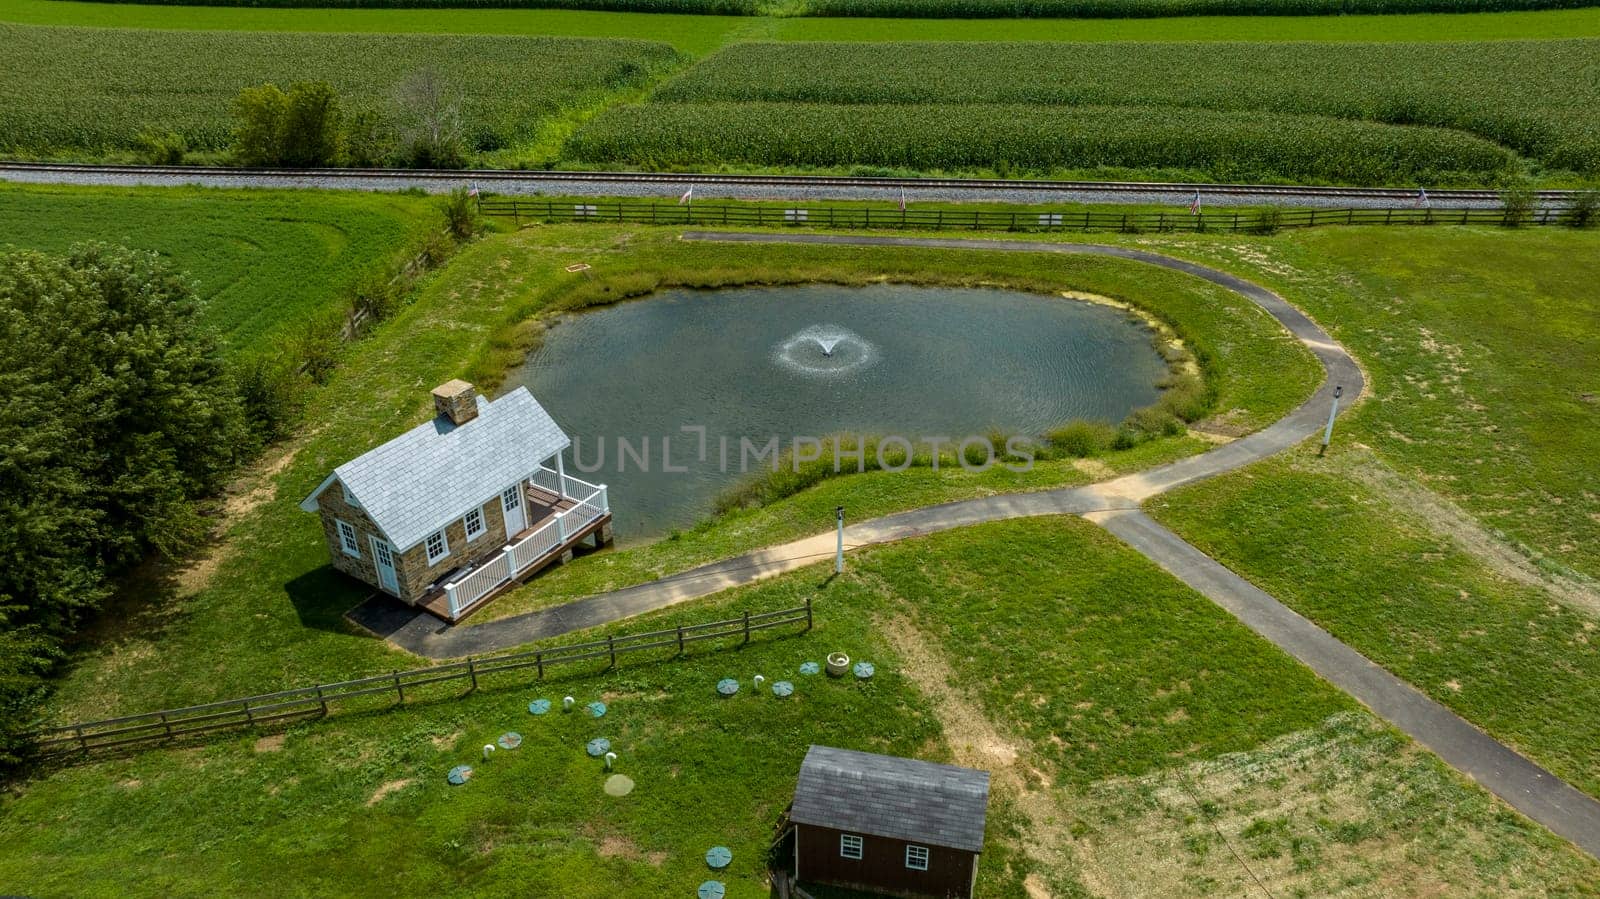 Aerial View Of A Small Pond With A Fountain Next To A Two-Story House And A Curving Path With Lush Farmland And A Railroad Track In The Background.